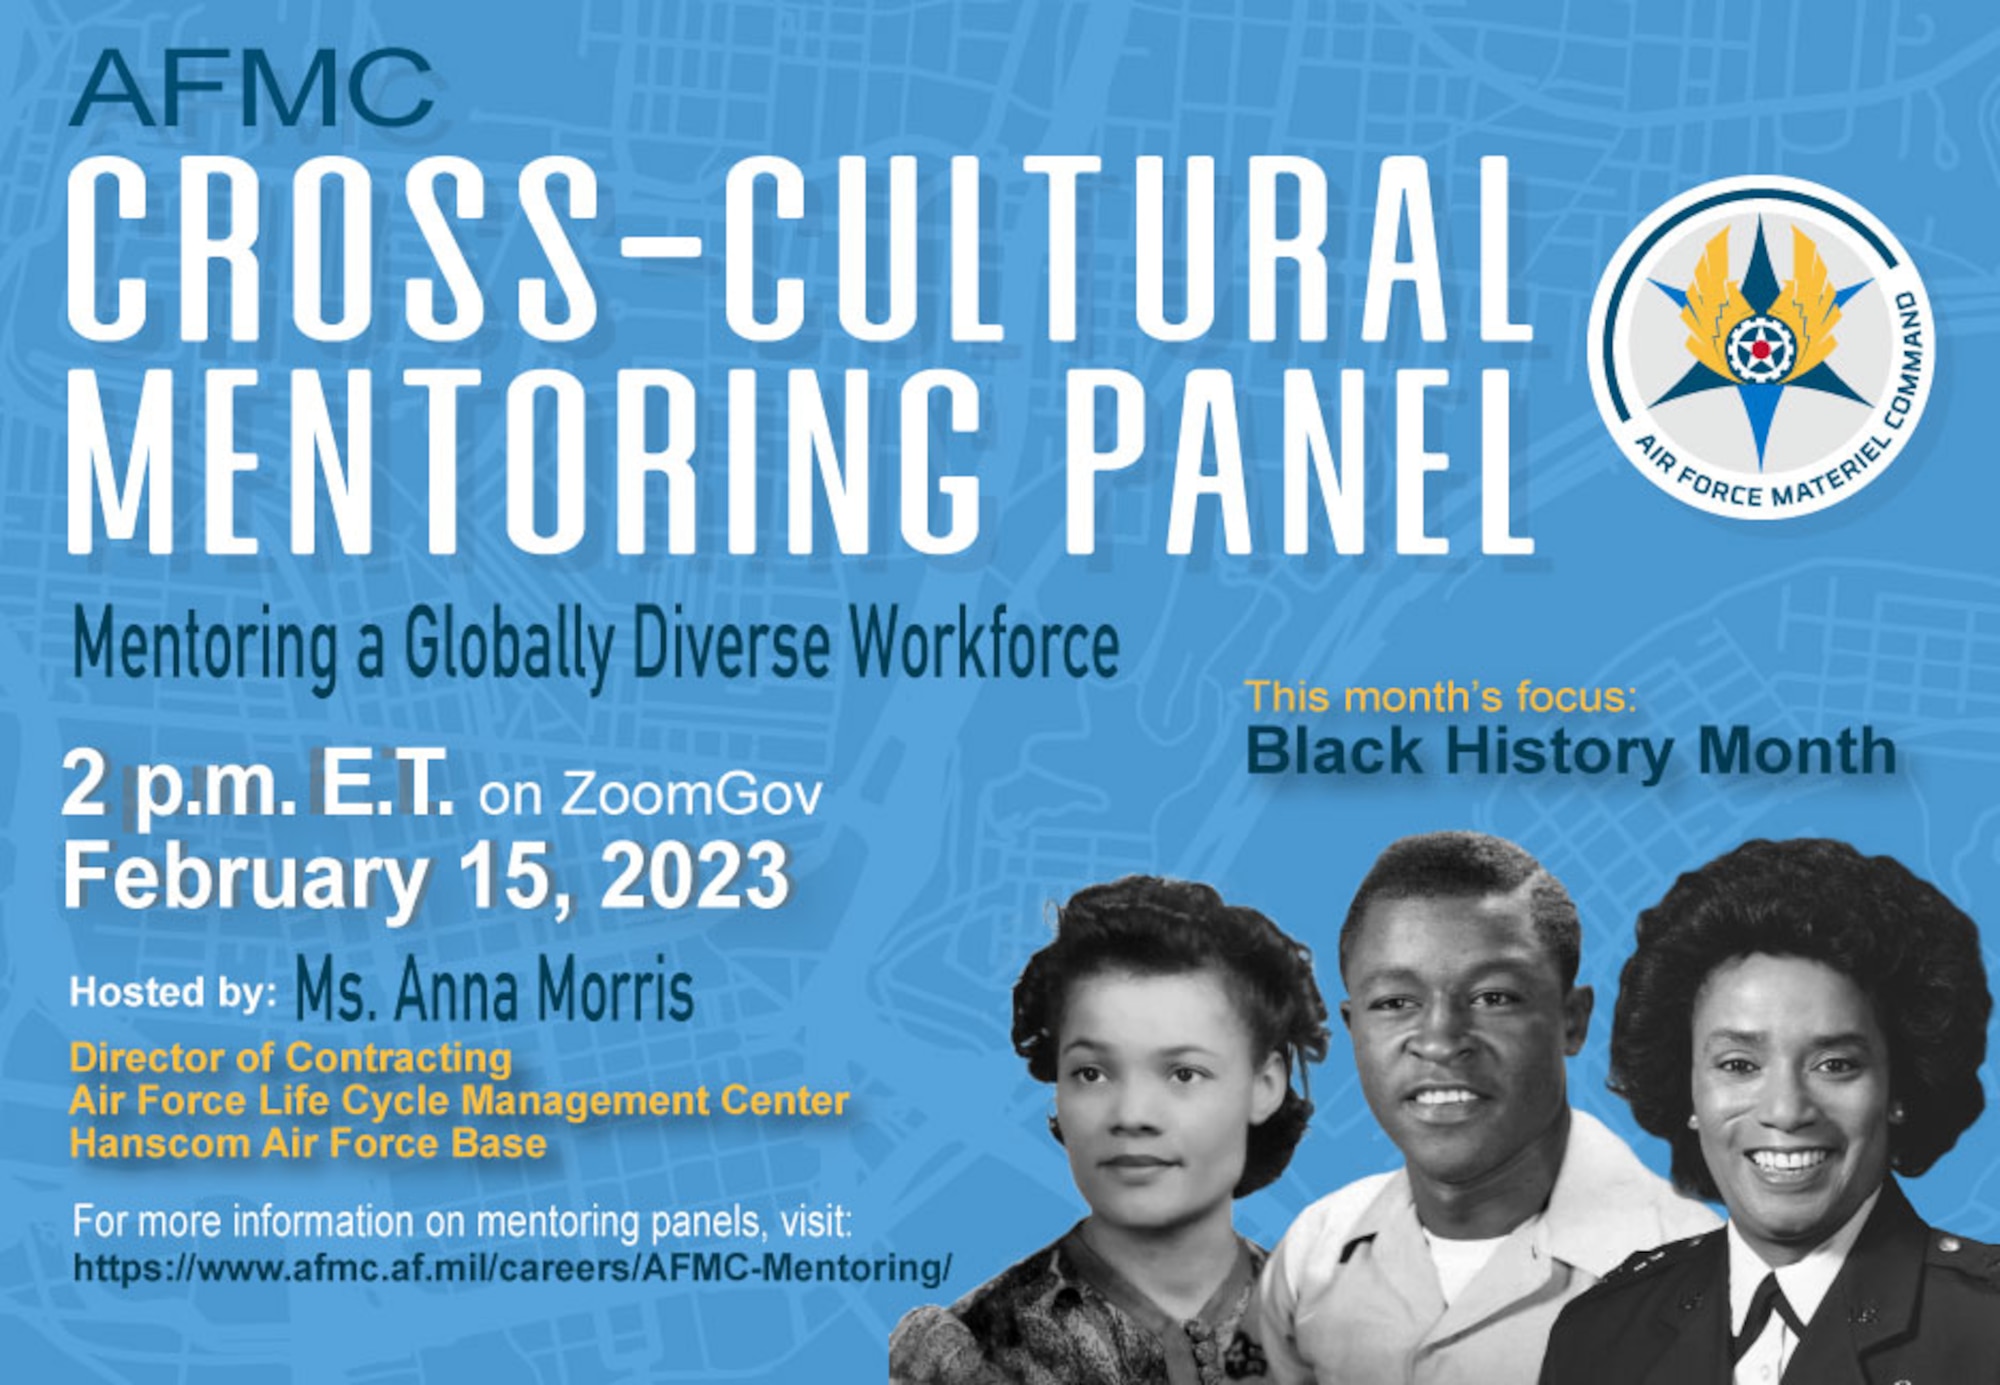 AFMC to host Black History Month Mentoring Panel > Edwards Air